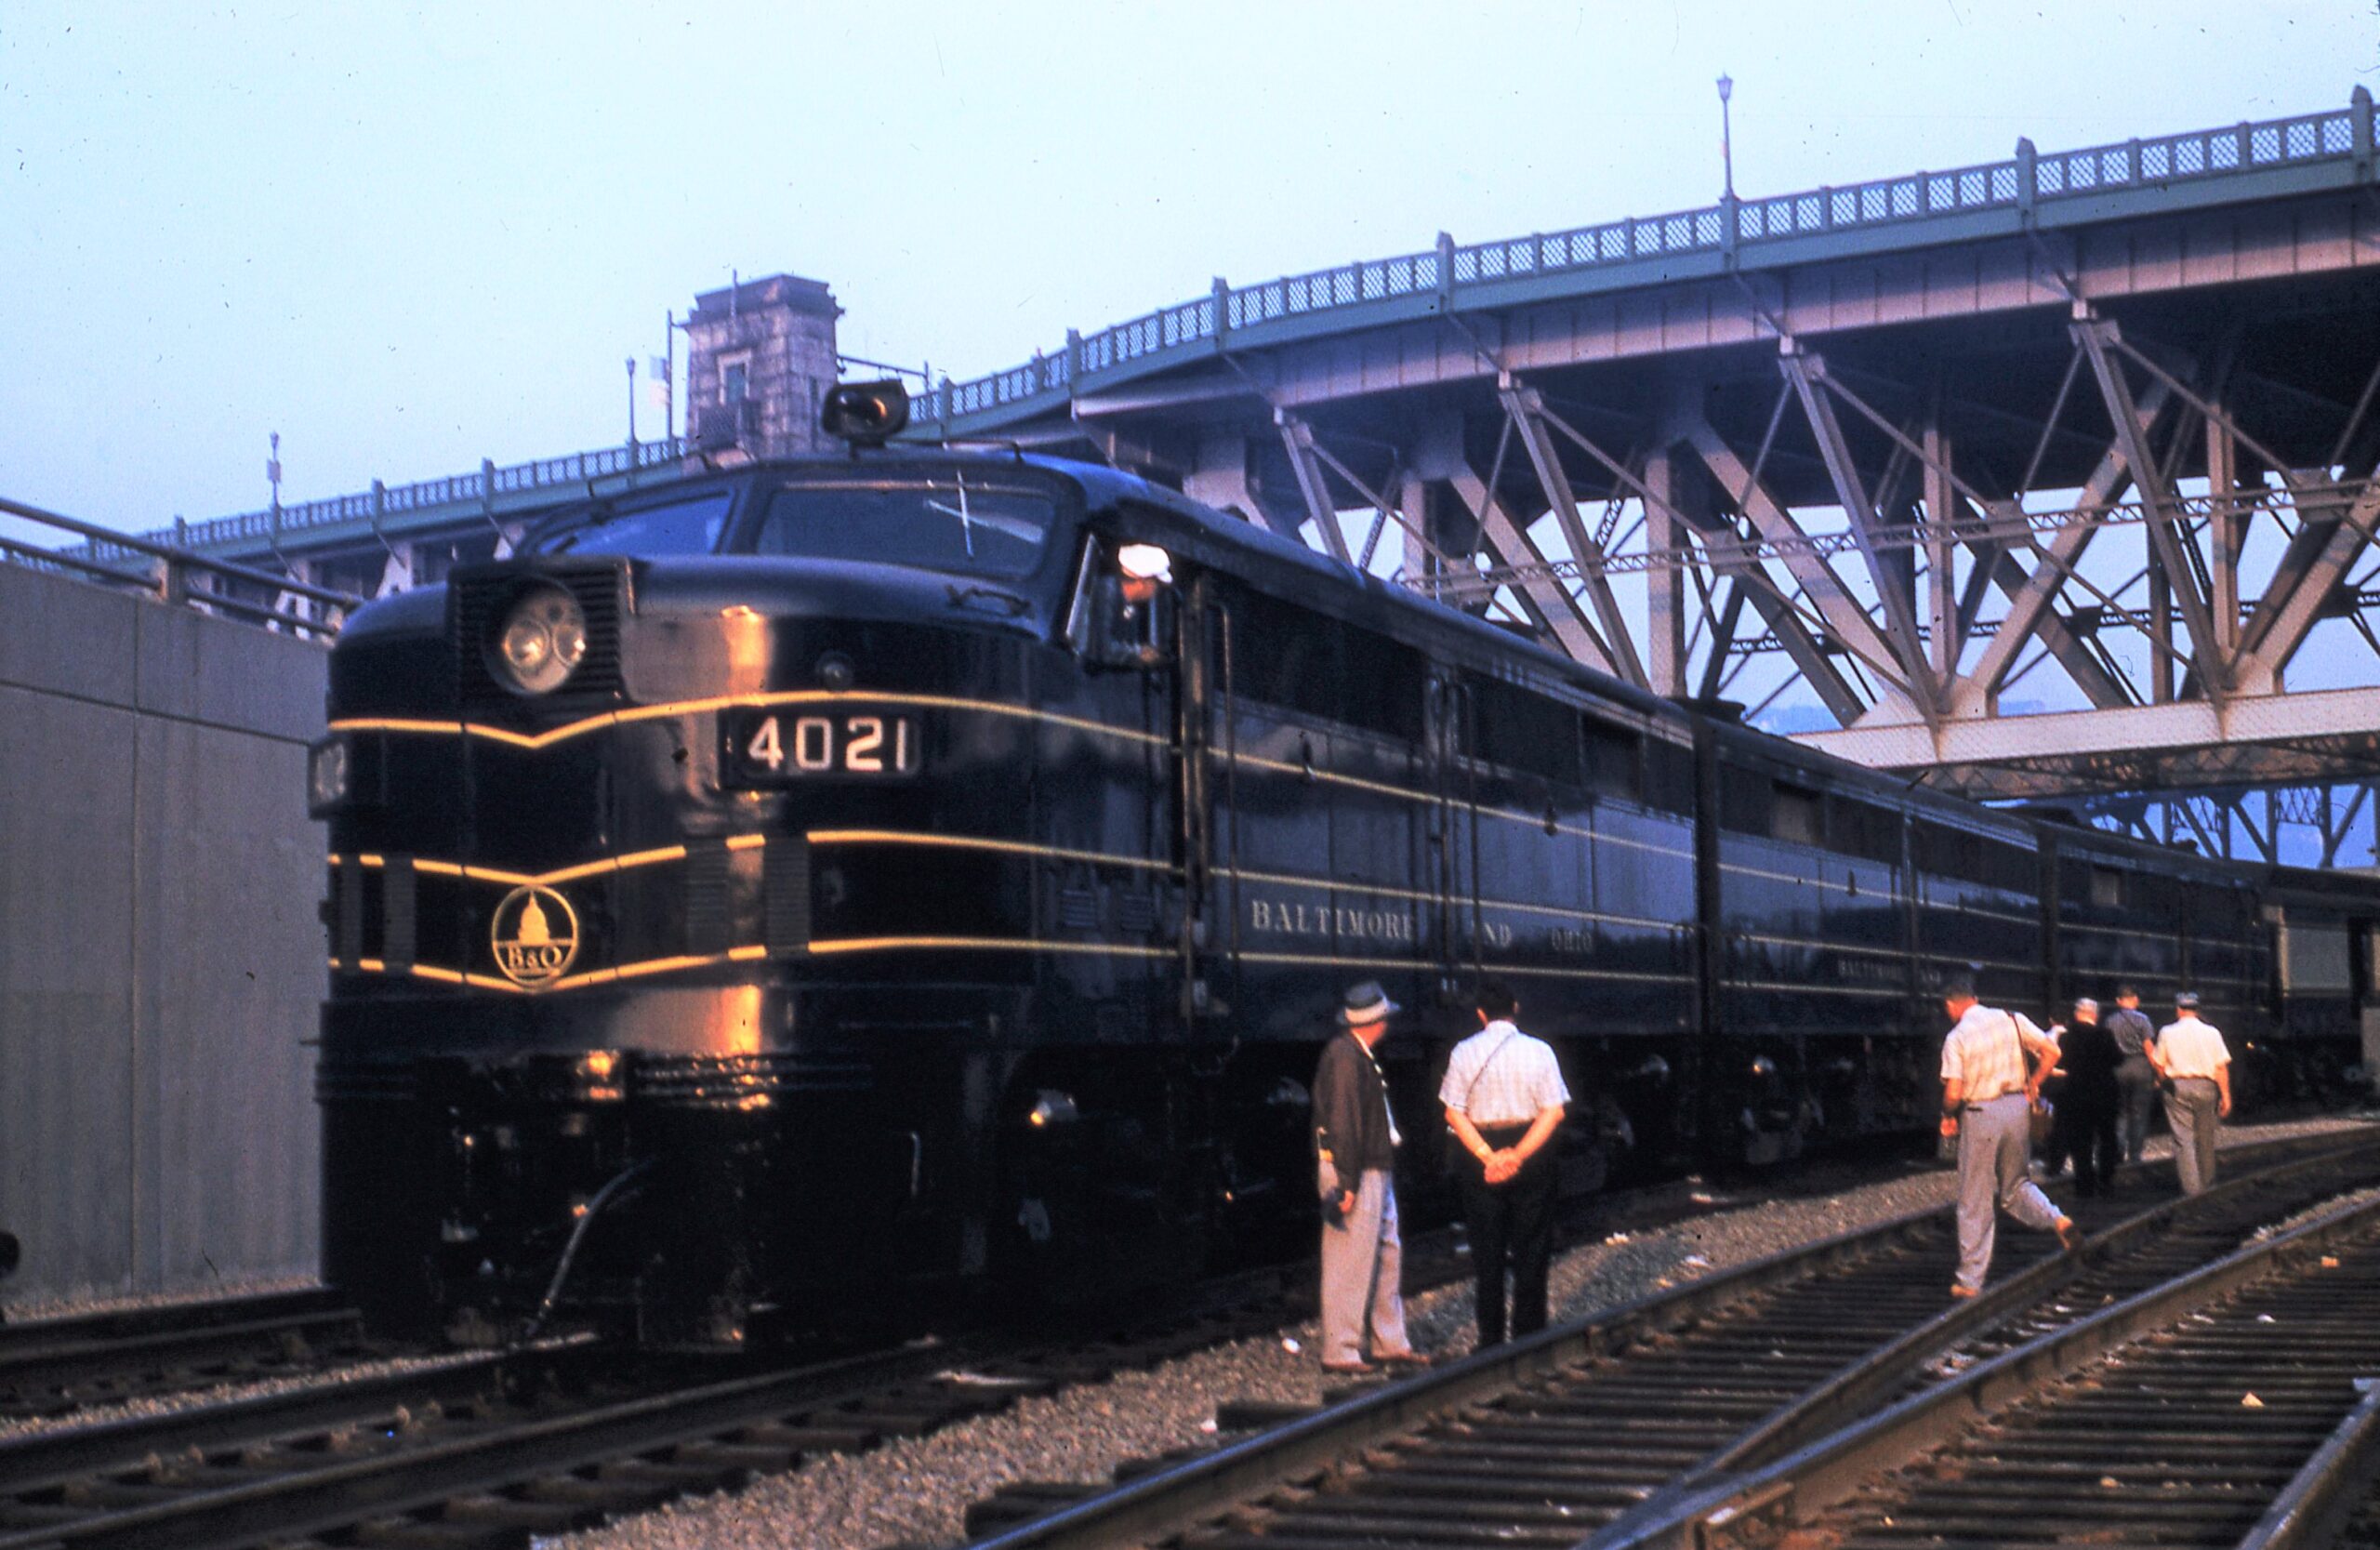 Baltimore and Ohio | Pittsburgh, Pennsylvania | Grant Avenue Station | Class FA-2 #4021 + FA-2 B and FA2 Alco Diesel-electric locomotive | 1959 NRHS Convention Special Passenger Train | September 6, 1959 | NRHS Collection